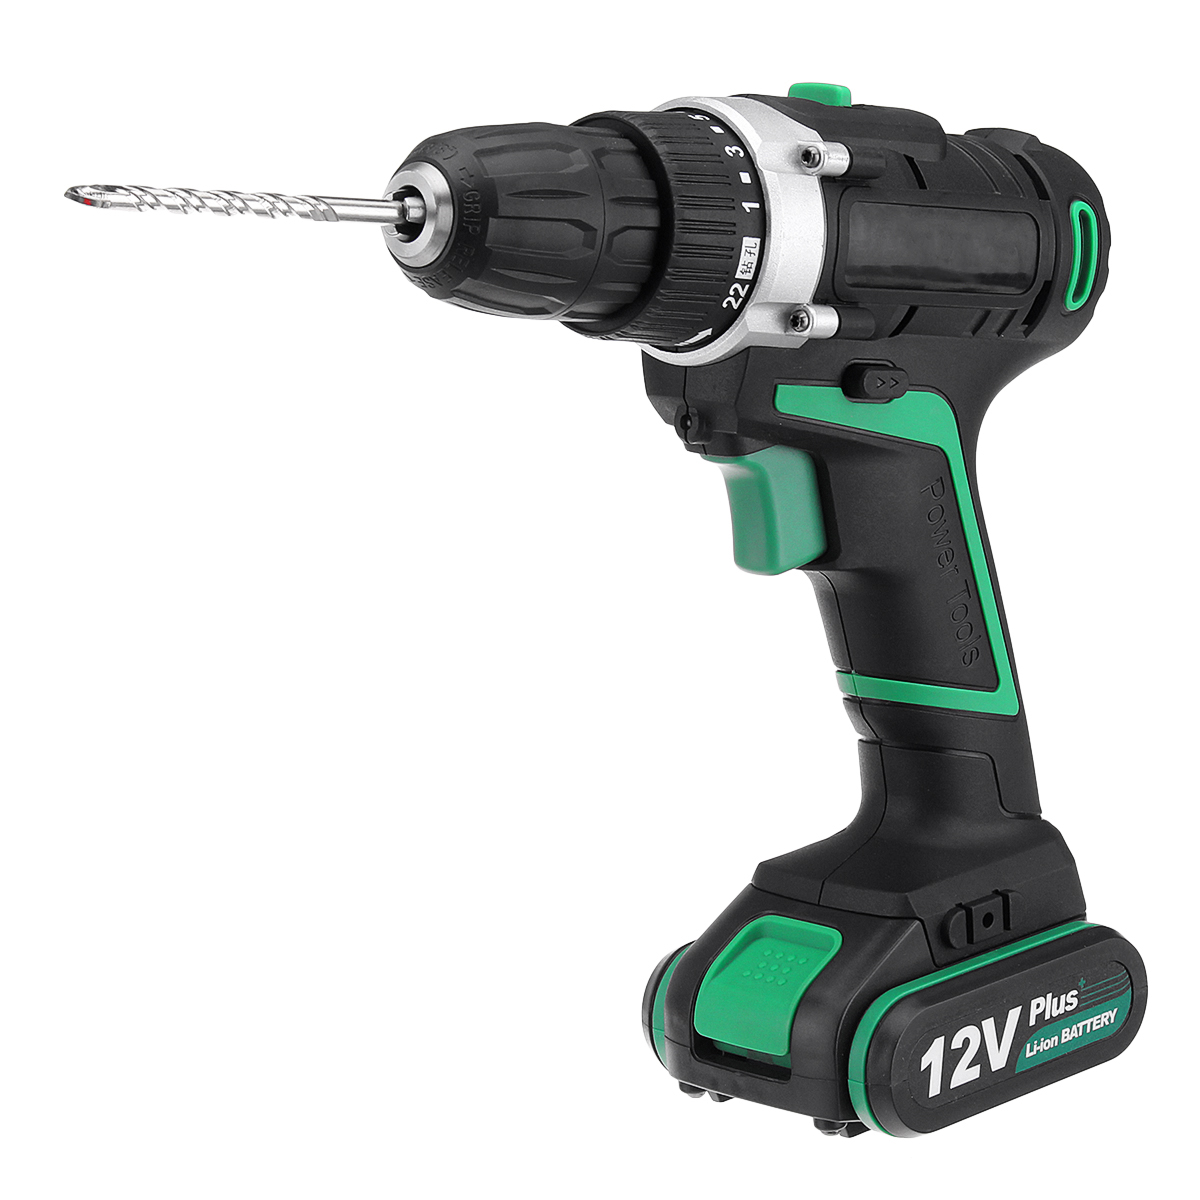 AC100-240V-Electric-Screwdriver-Cordless-Power-Drill-Tools-Dual-Speed-Impact-With-Accessories-1285297-5